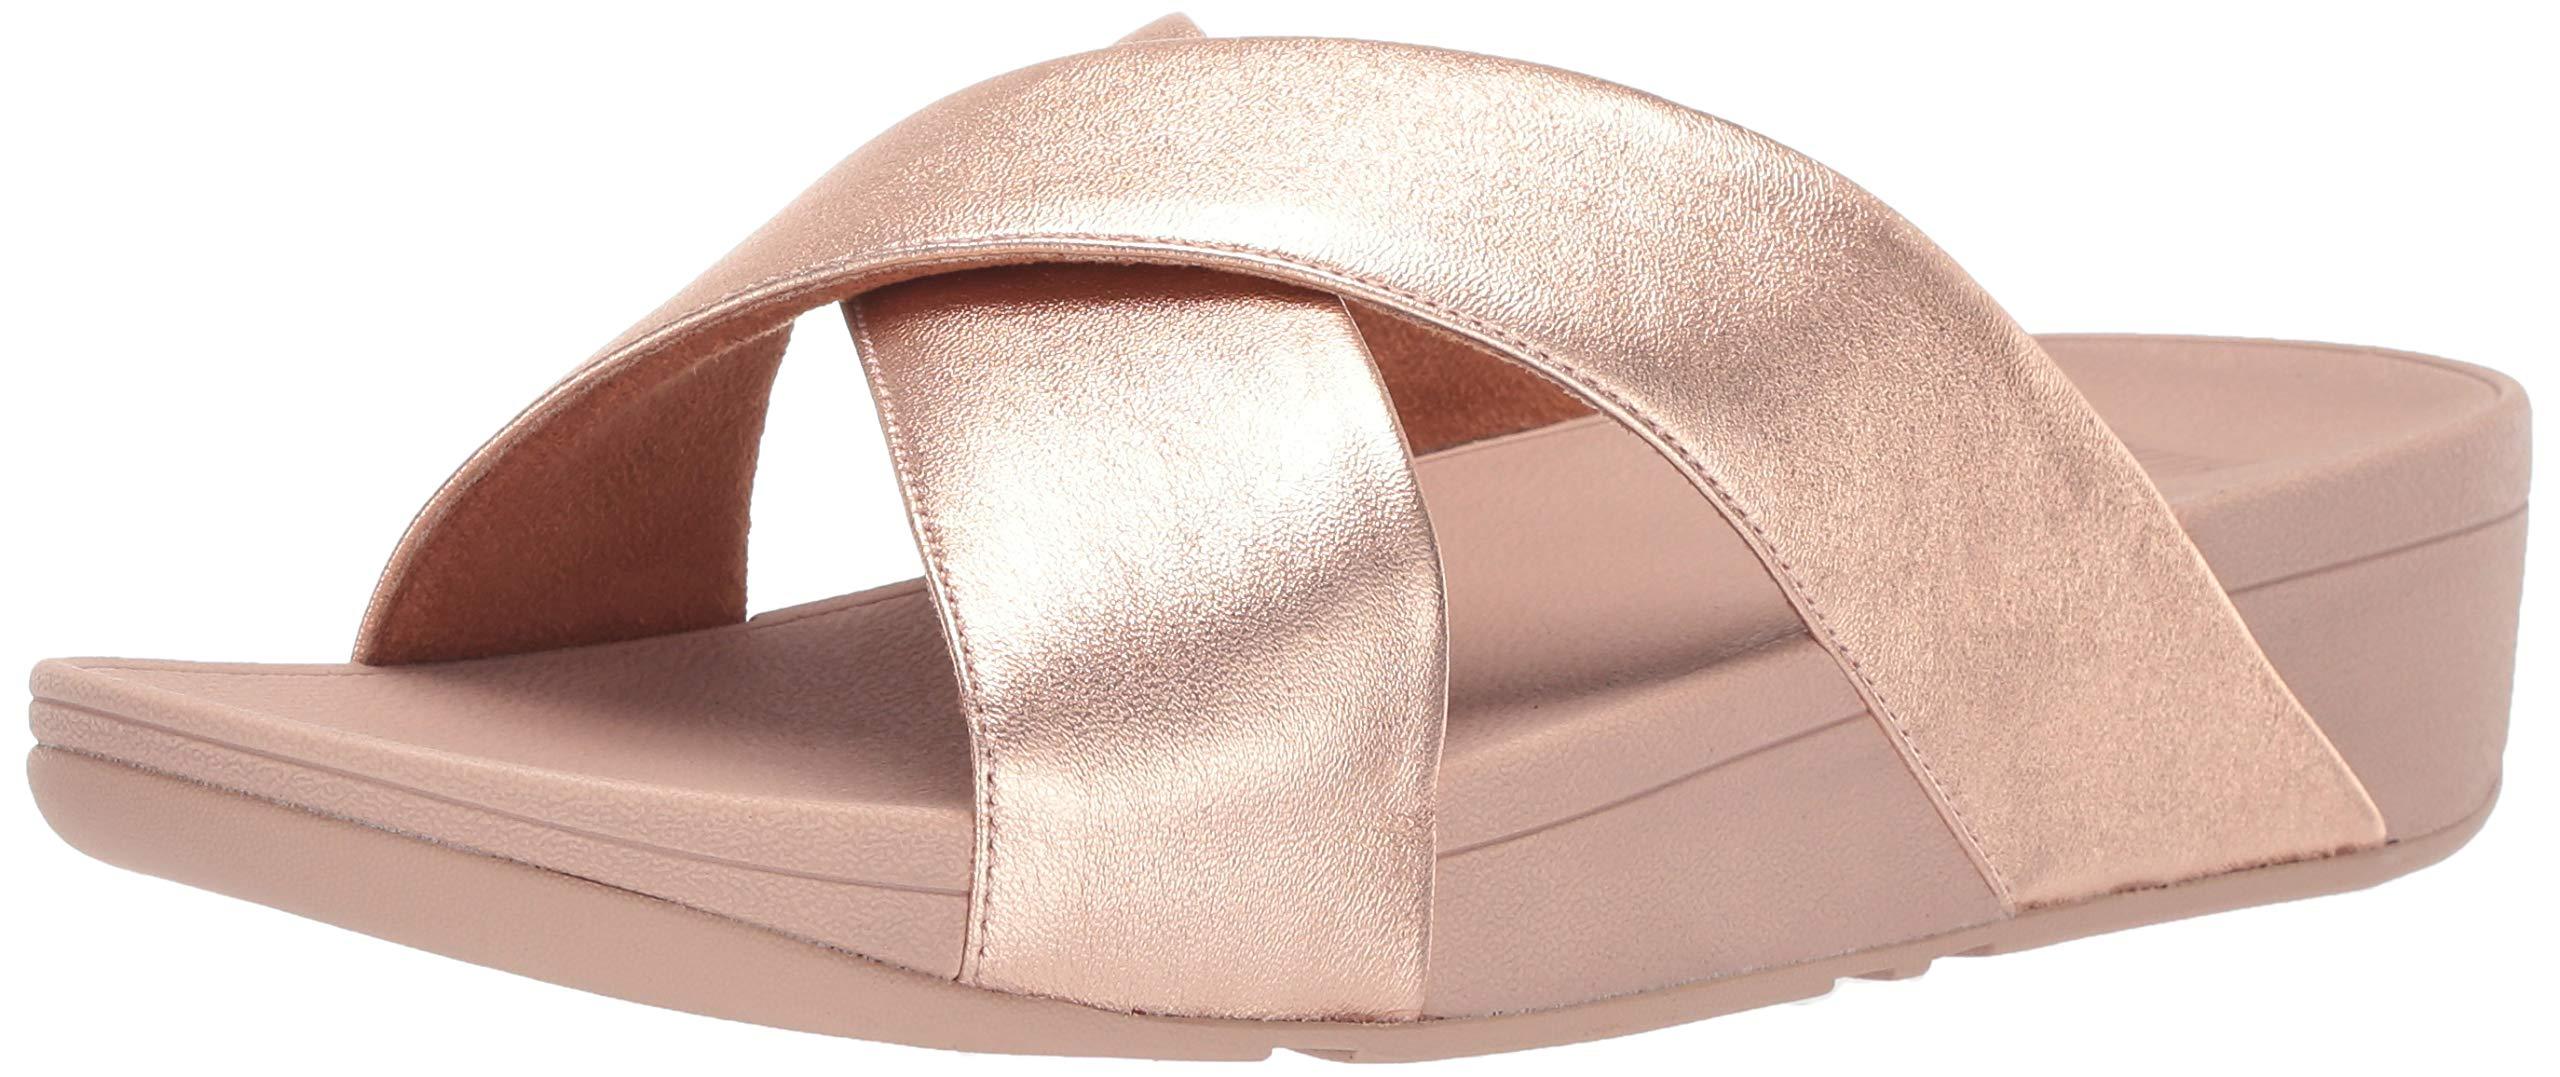 Fitflop Lulu Cross Slide Sandals-leather in Rose Gold (Pink) | Lyst